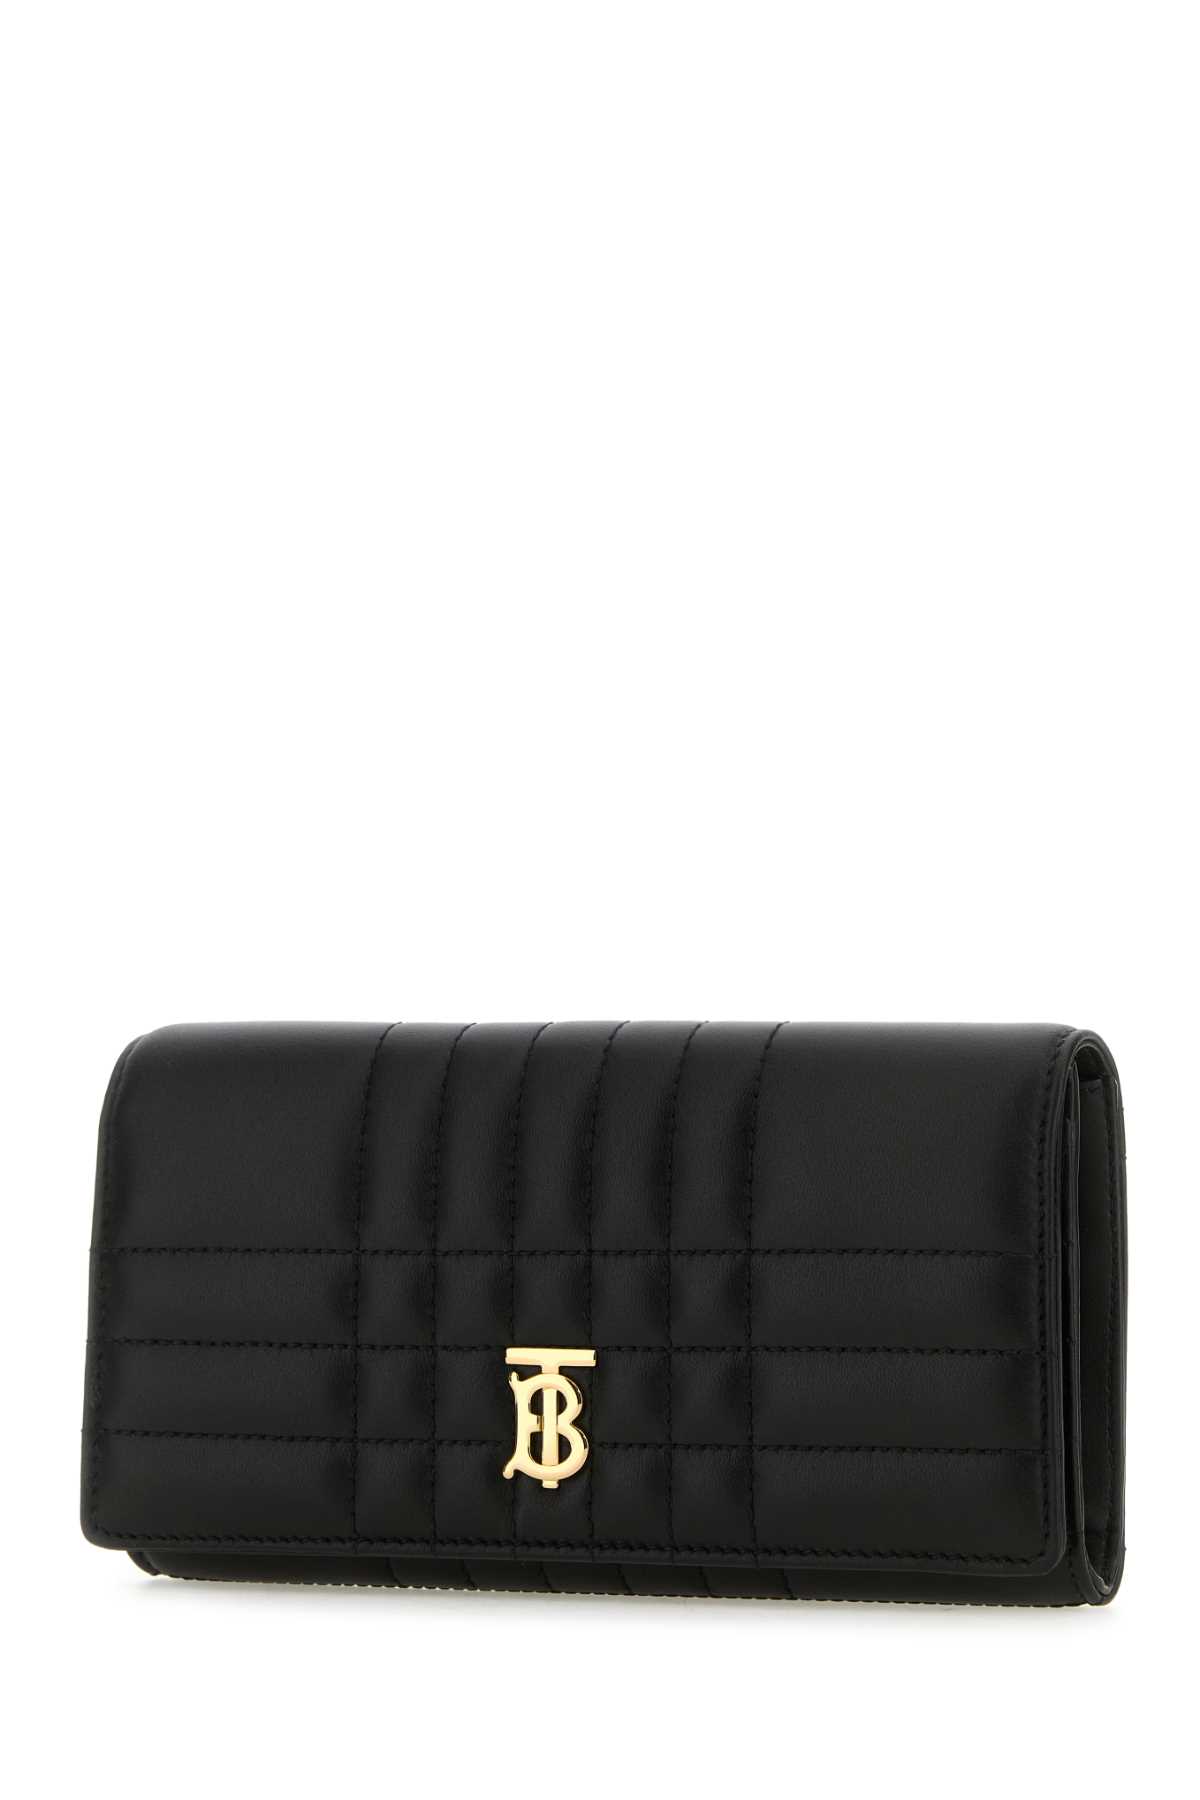 Burberry Black Nappa Leather Lola Wallet In Blacklightgold